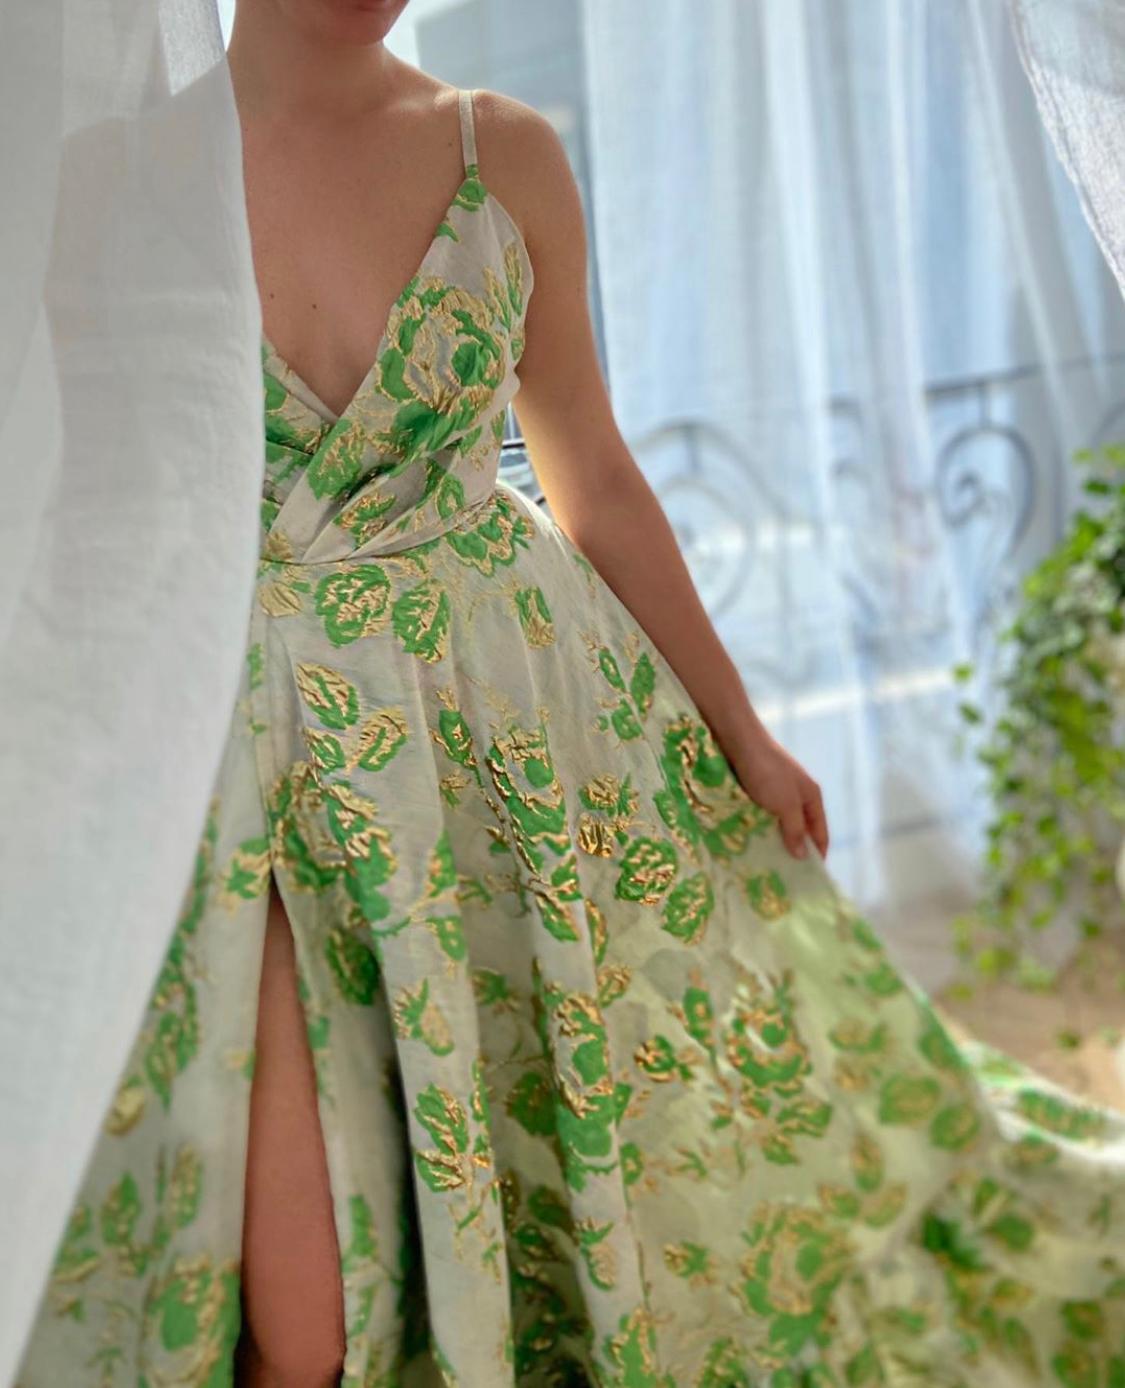 Green A-Line dress with printed flowers, v-neck and spaghetti straps